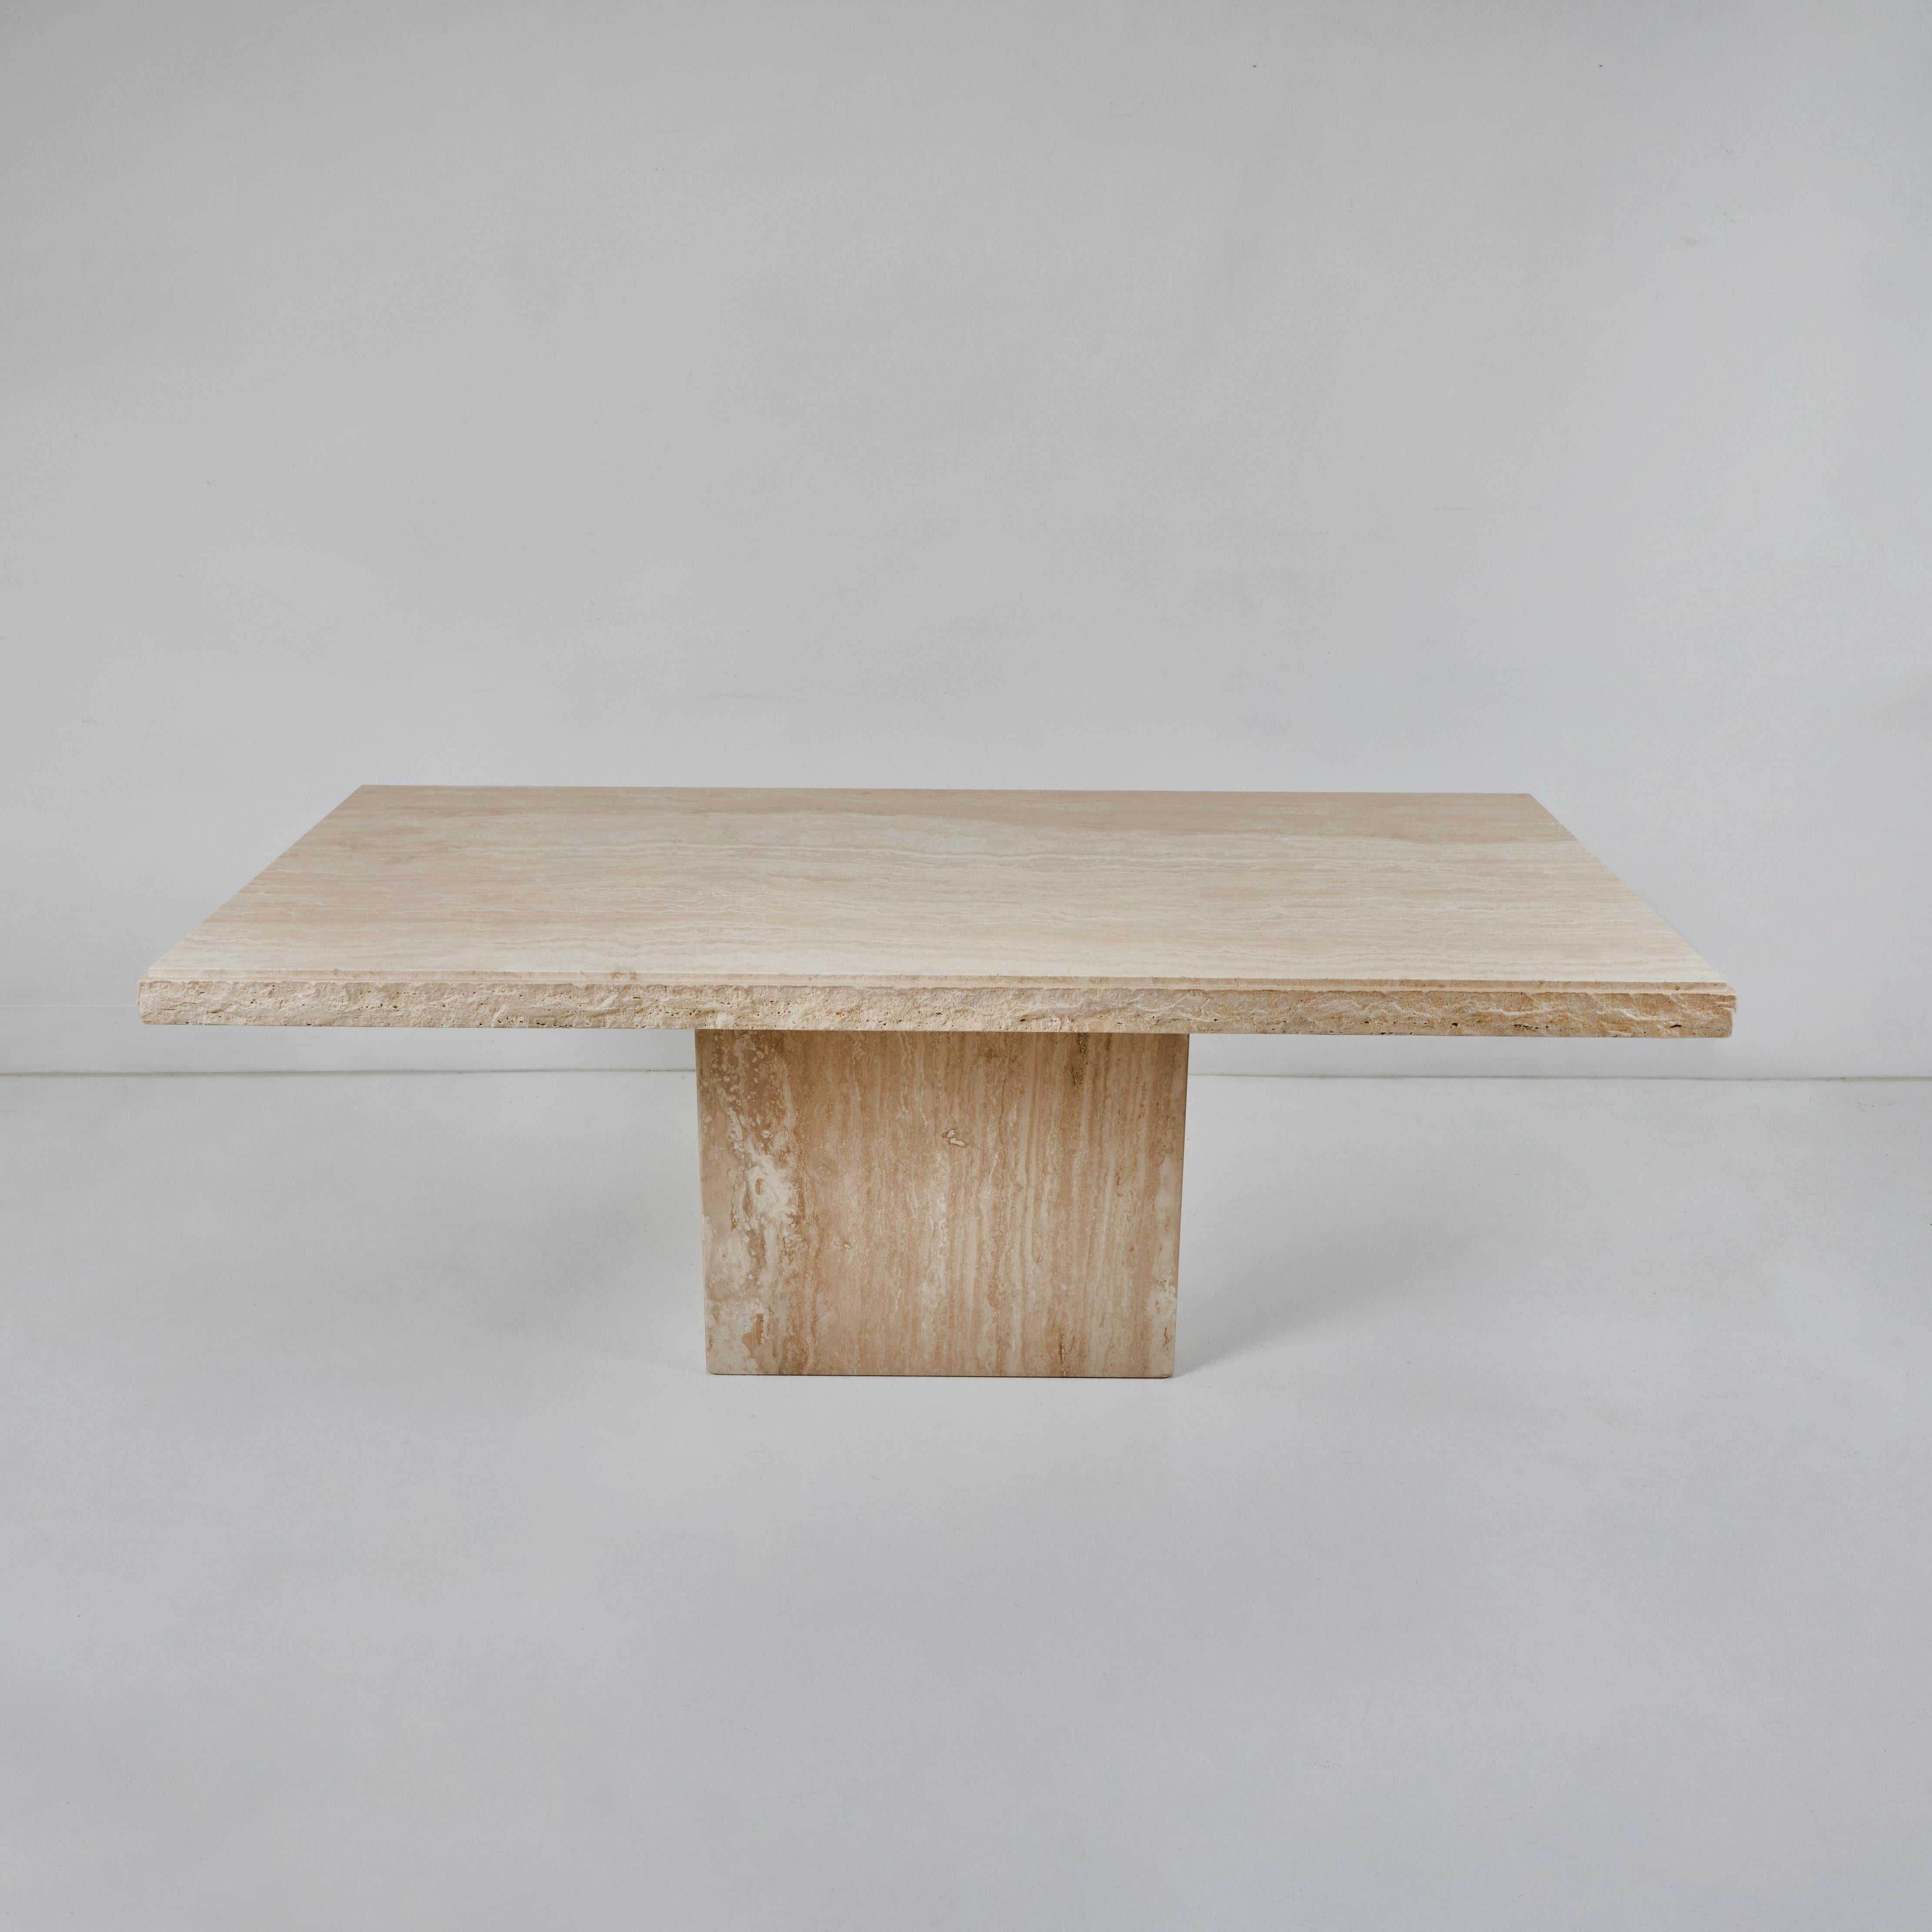 Italian A Roman Travertine Dining Table with a Quarry Edge For Sale